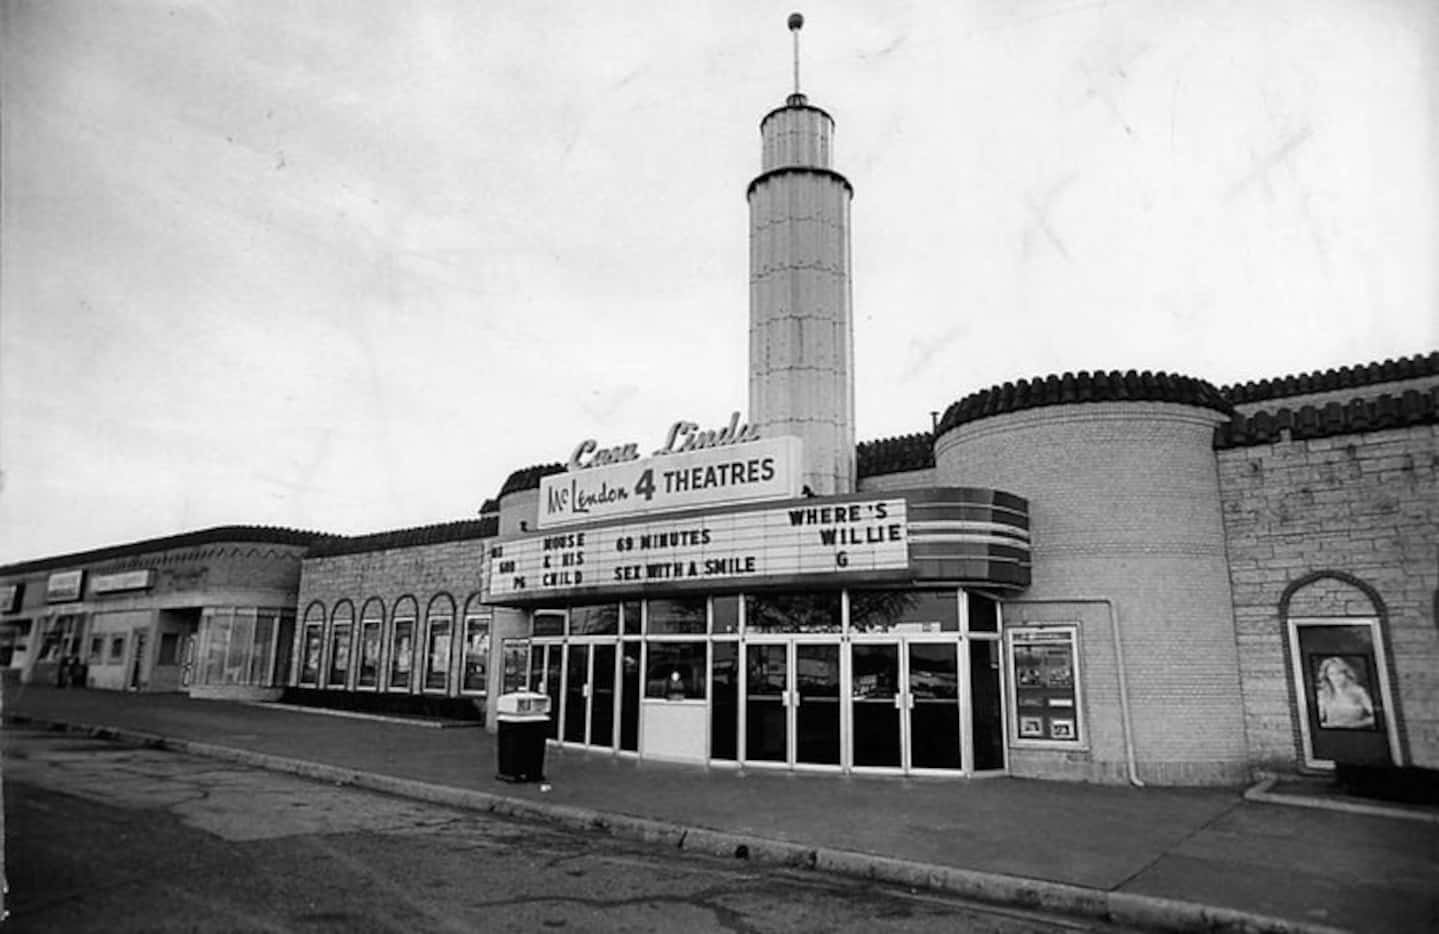 The Casa Linda theater was the first building in the plaza. It is now a Natural Grocers.